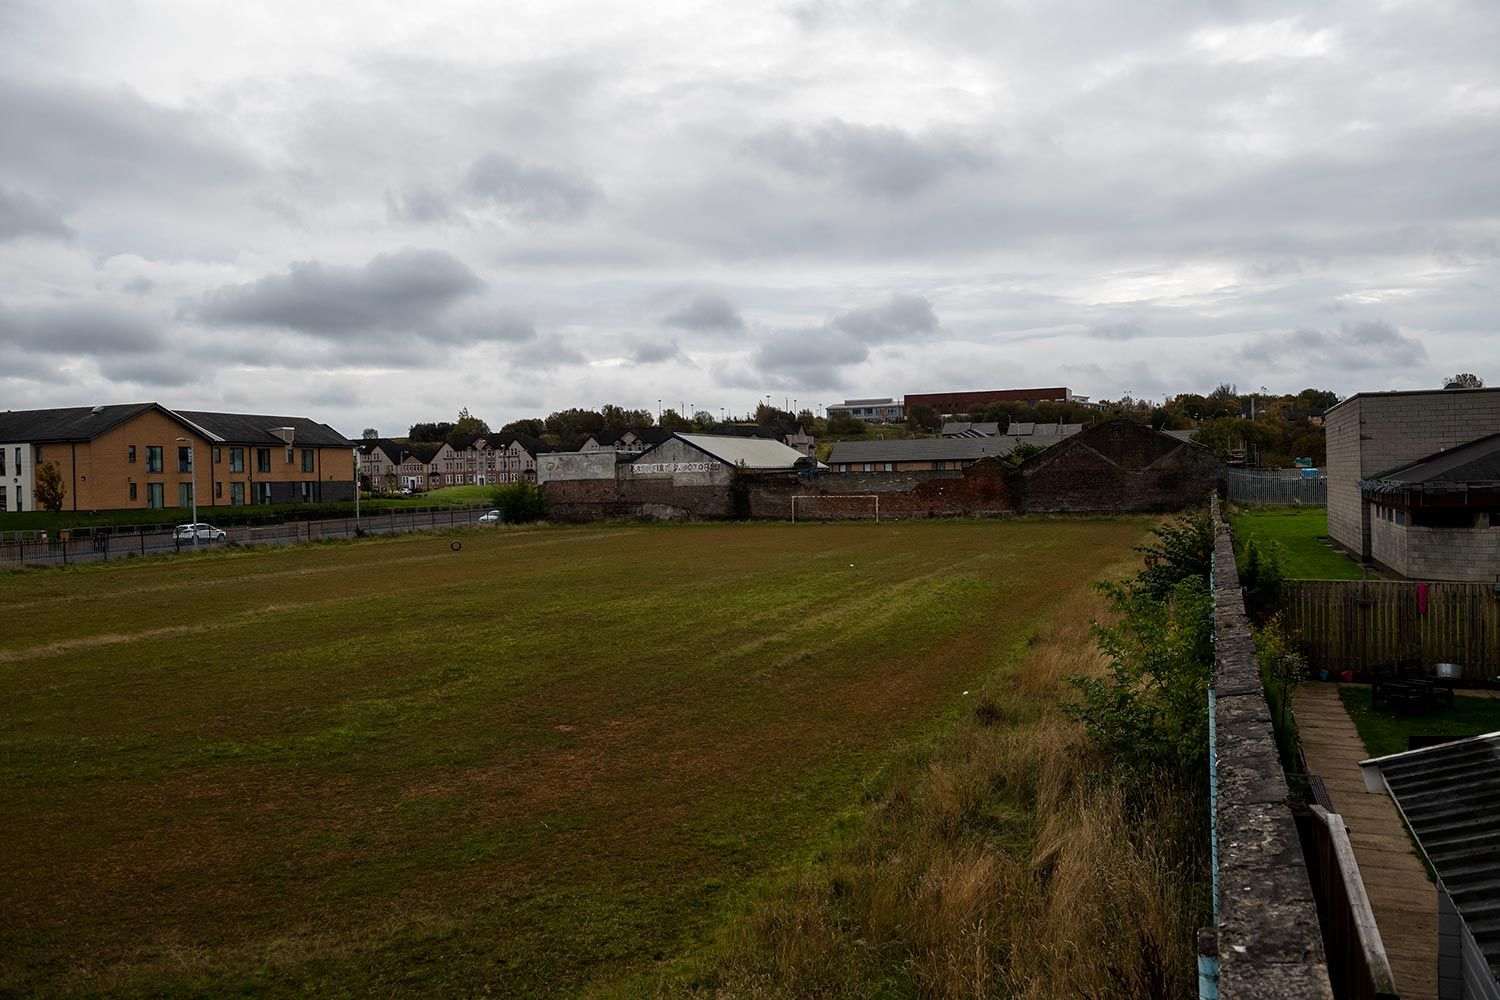 A polluted and fenced-off soccer field owned by Glasgow City Council. The soccer field, which was polluted by an iron industry that left town in the late 1960s, is located behind the Possilpoint Community Centre and will be the future location of a new community facility. Image by Michael Santiago. United Kingdom, 2019.